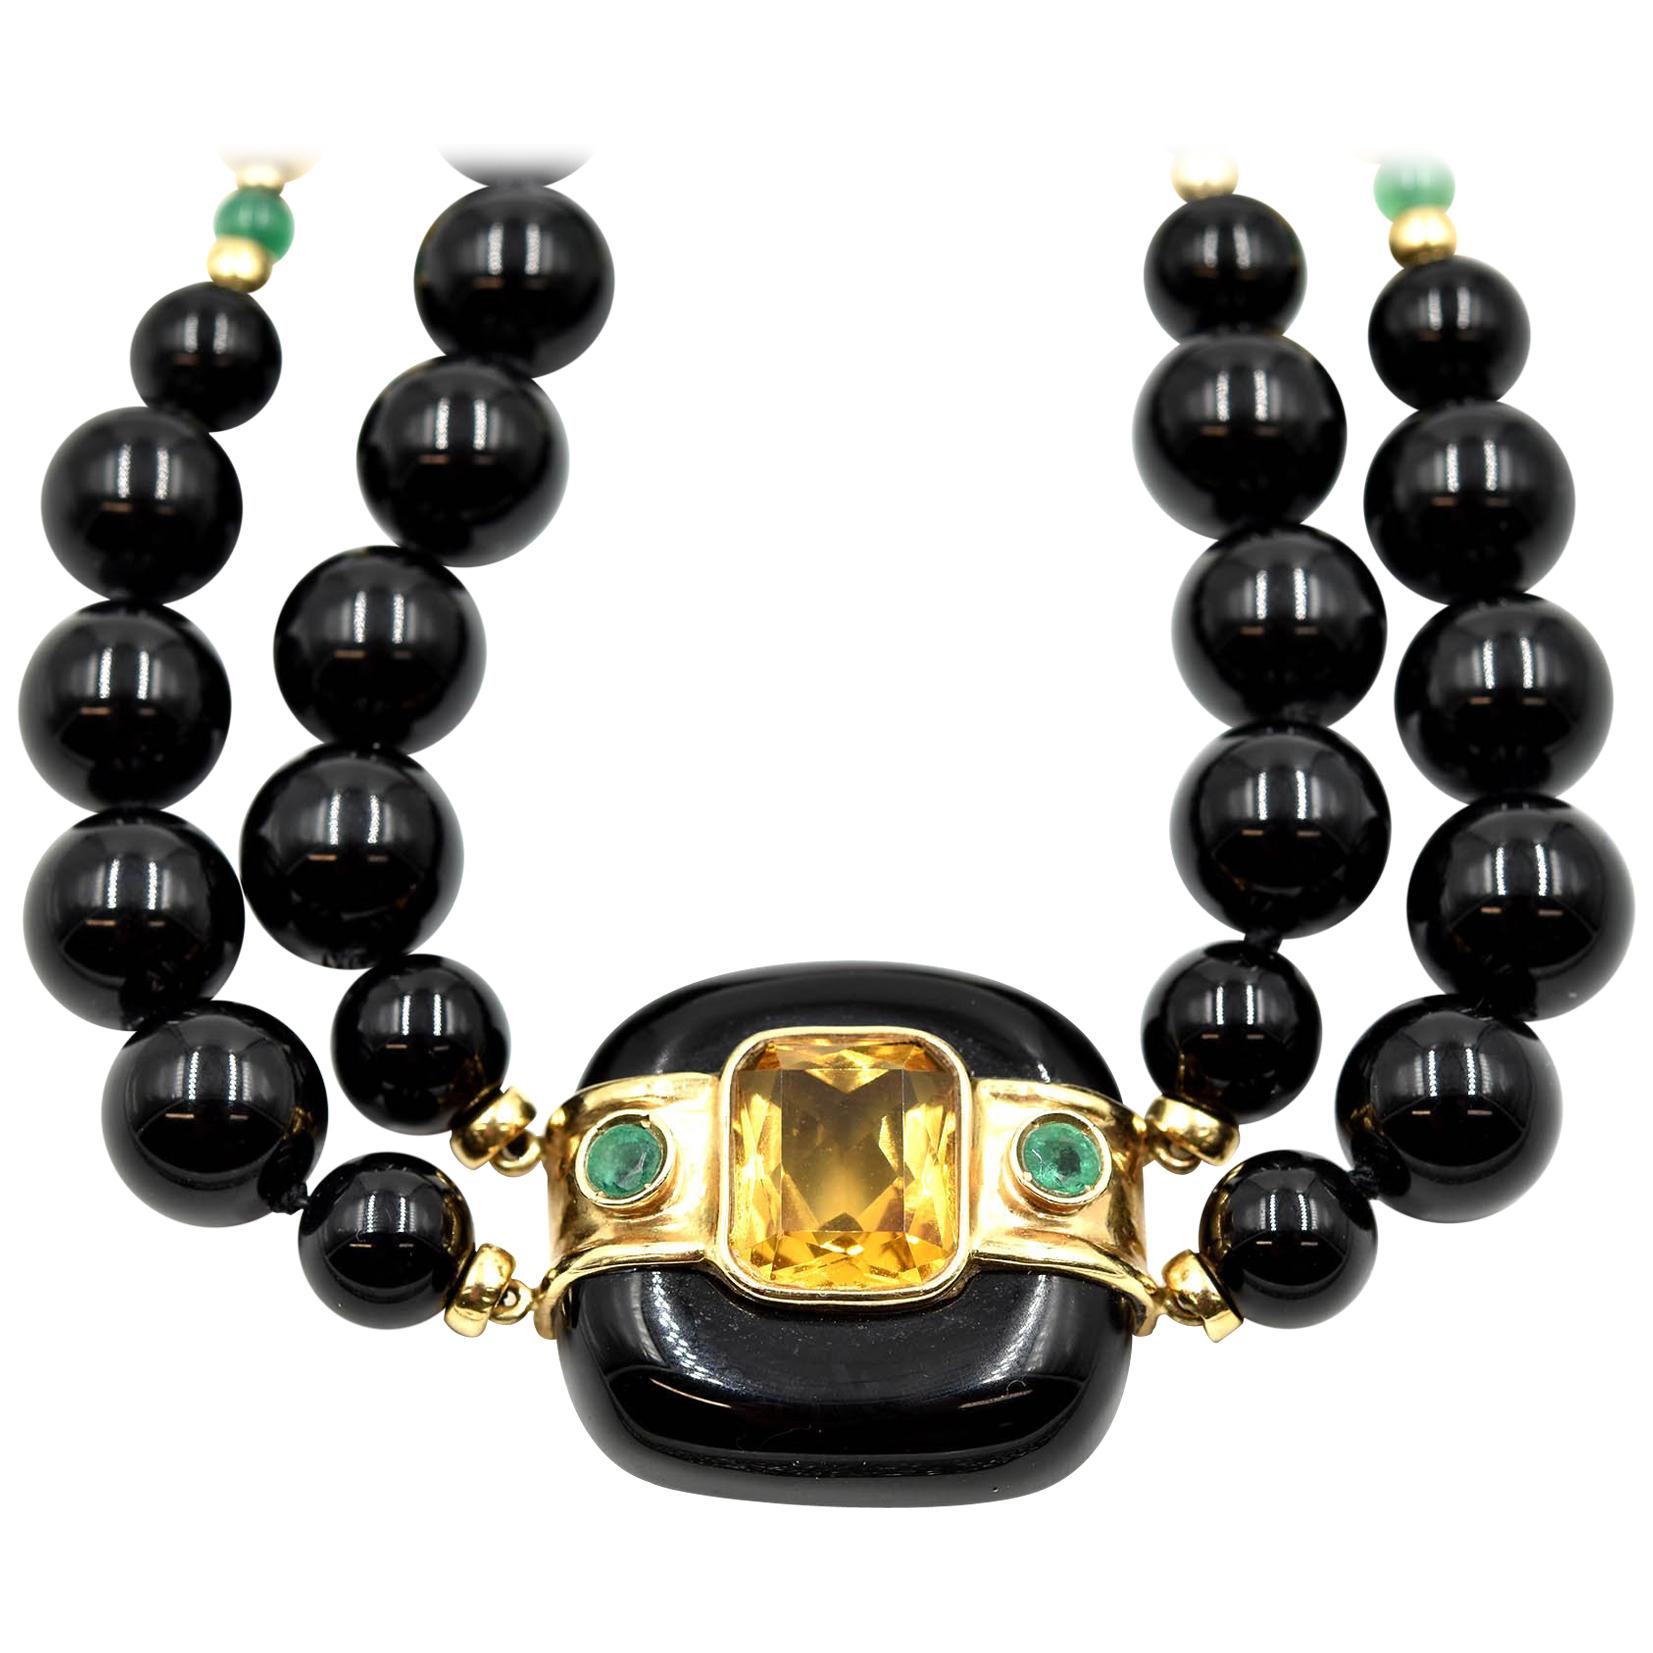 14 Karat Yellow Gold Beaded Black Onyx Necklace with Citrine and Emerald Pendant